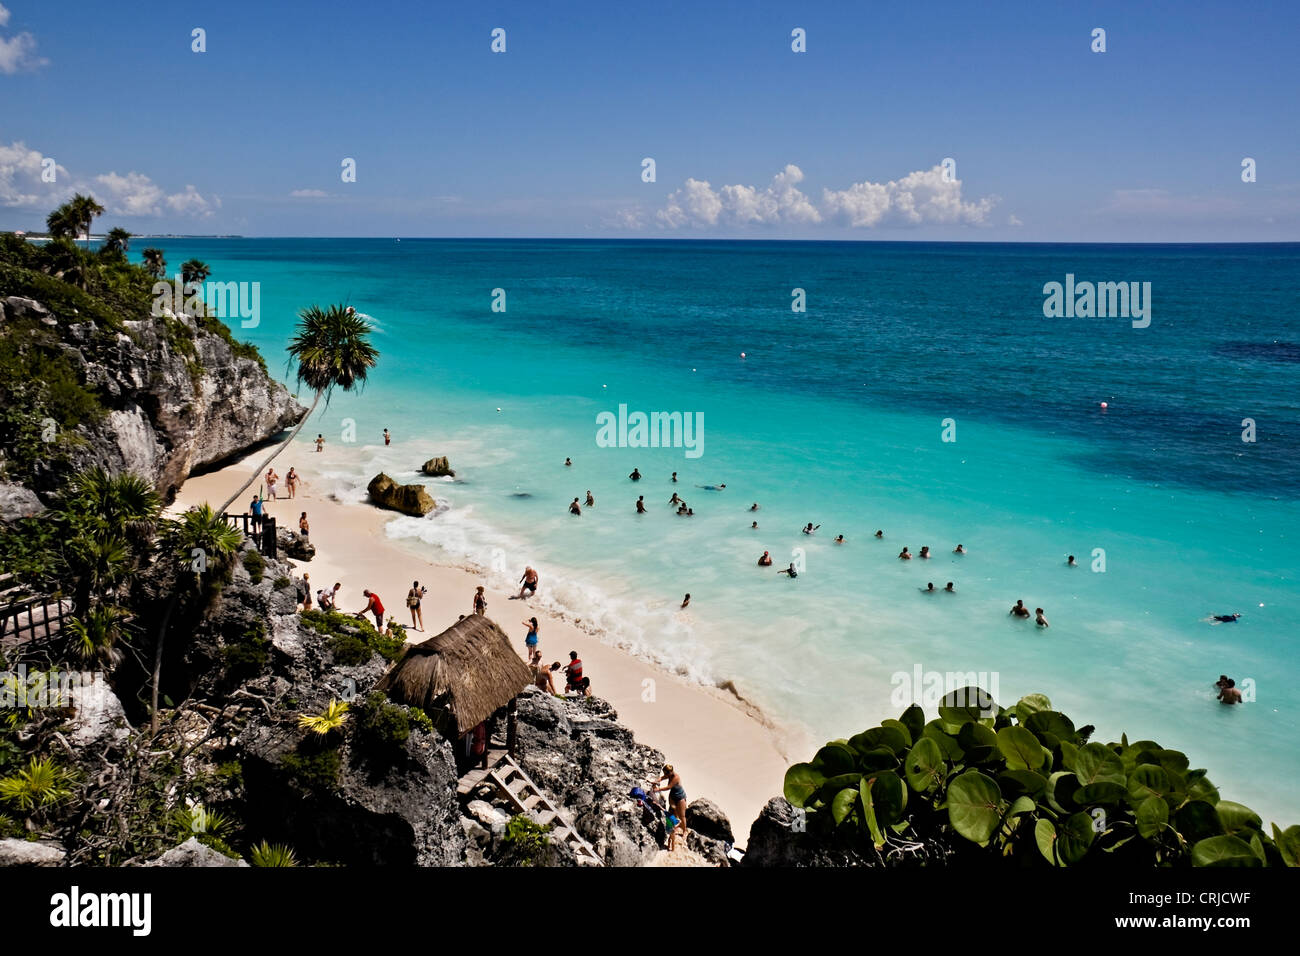 Landscape photo showing the beach at Tulum, Mexico on a sunny day. Stock Photo